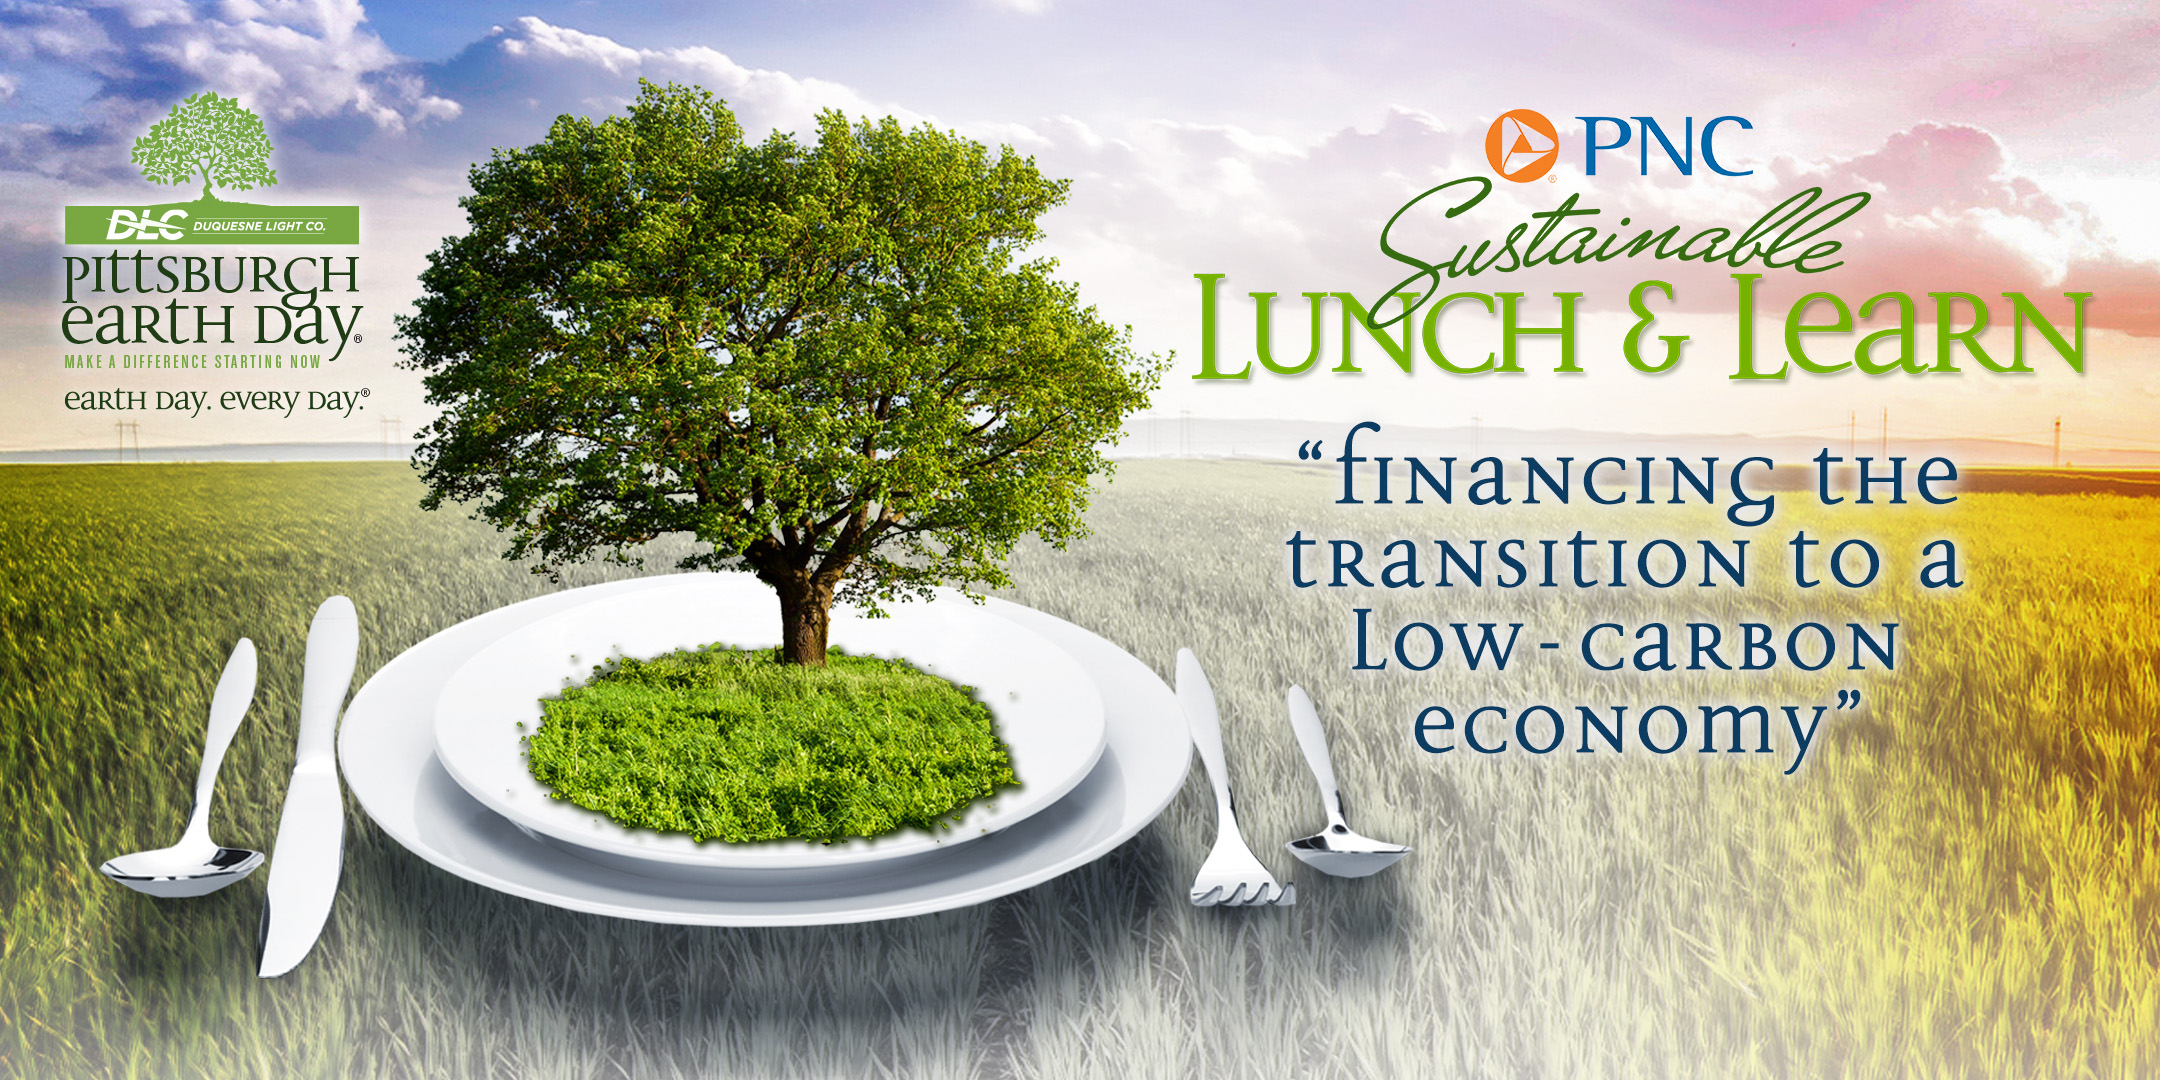 PNC Lunch and Learn - Financing the Transition to a Low Carbon Economy